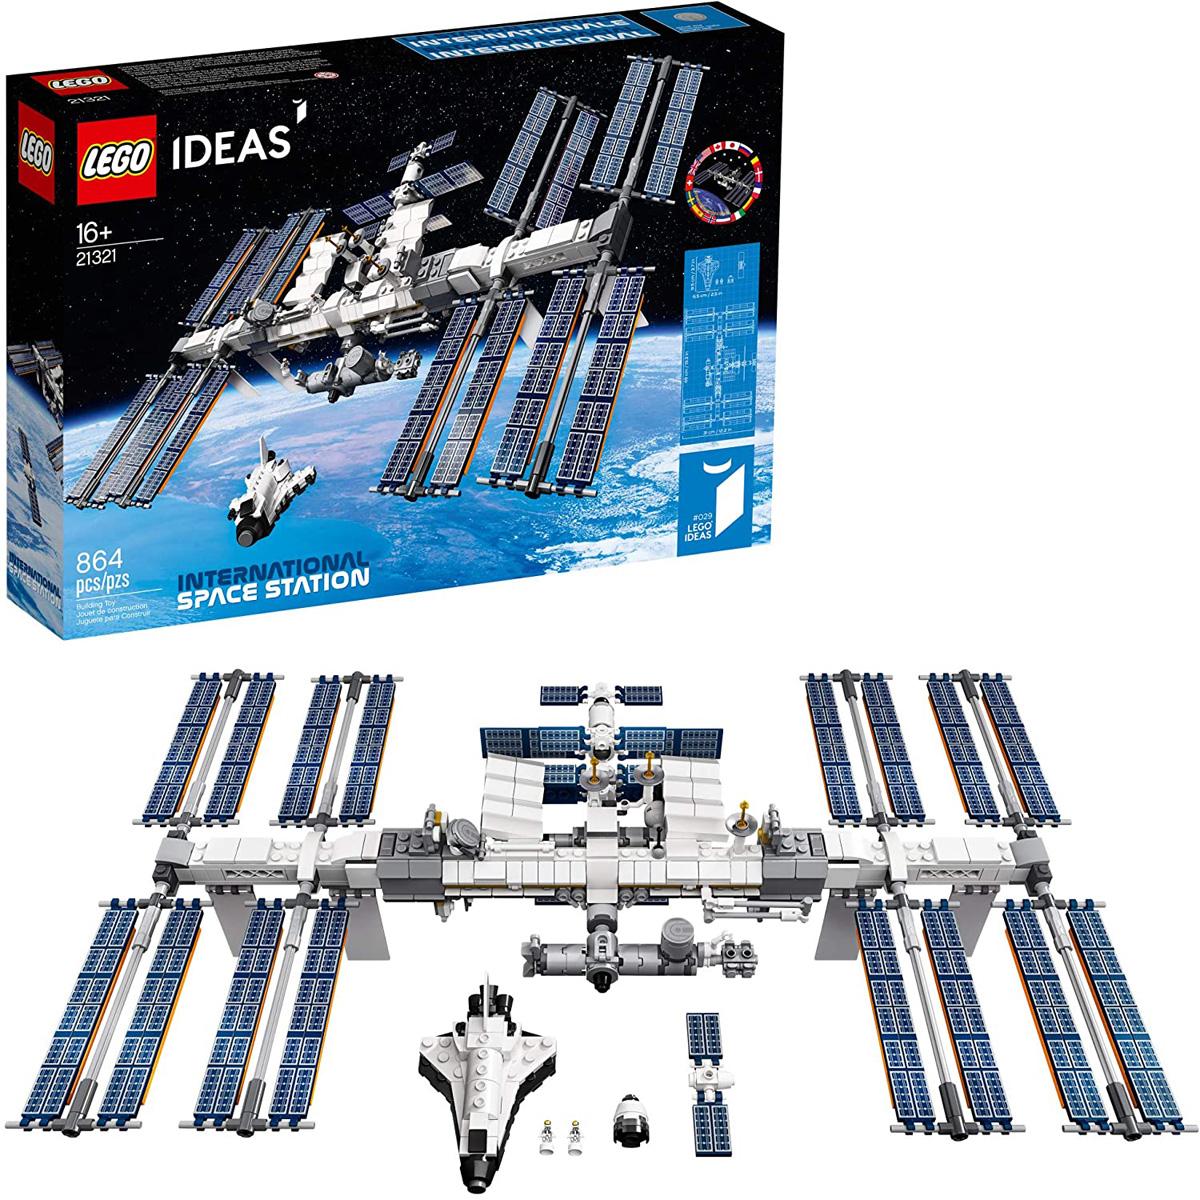 LEGO Ideas International Space Station Building Kit for $56.99 Shipped